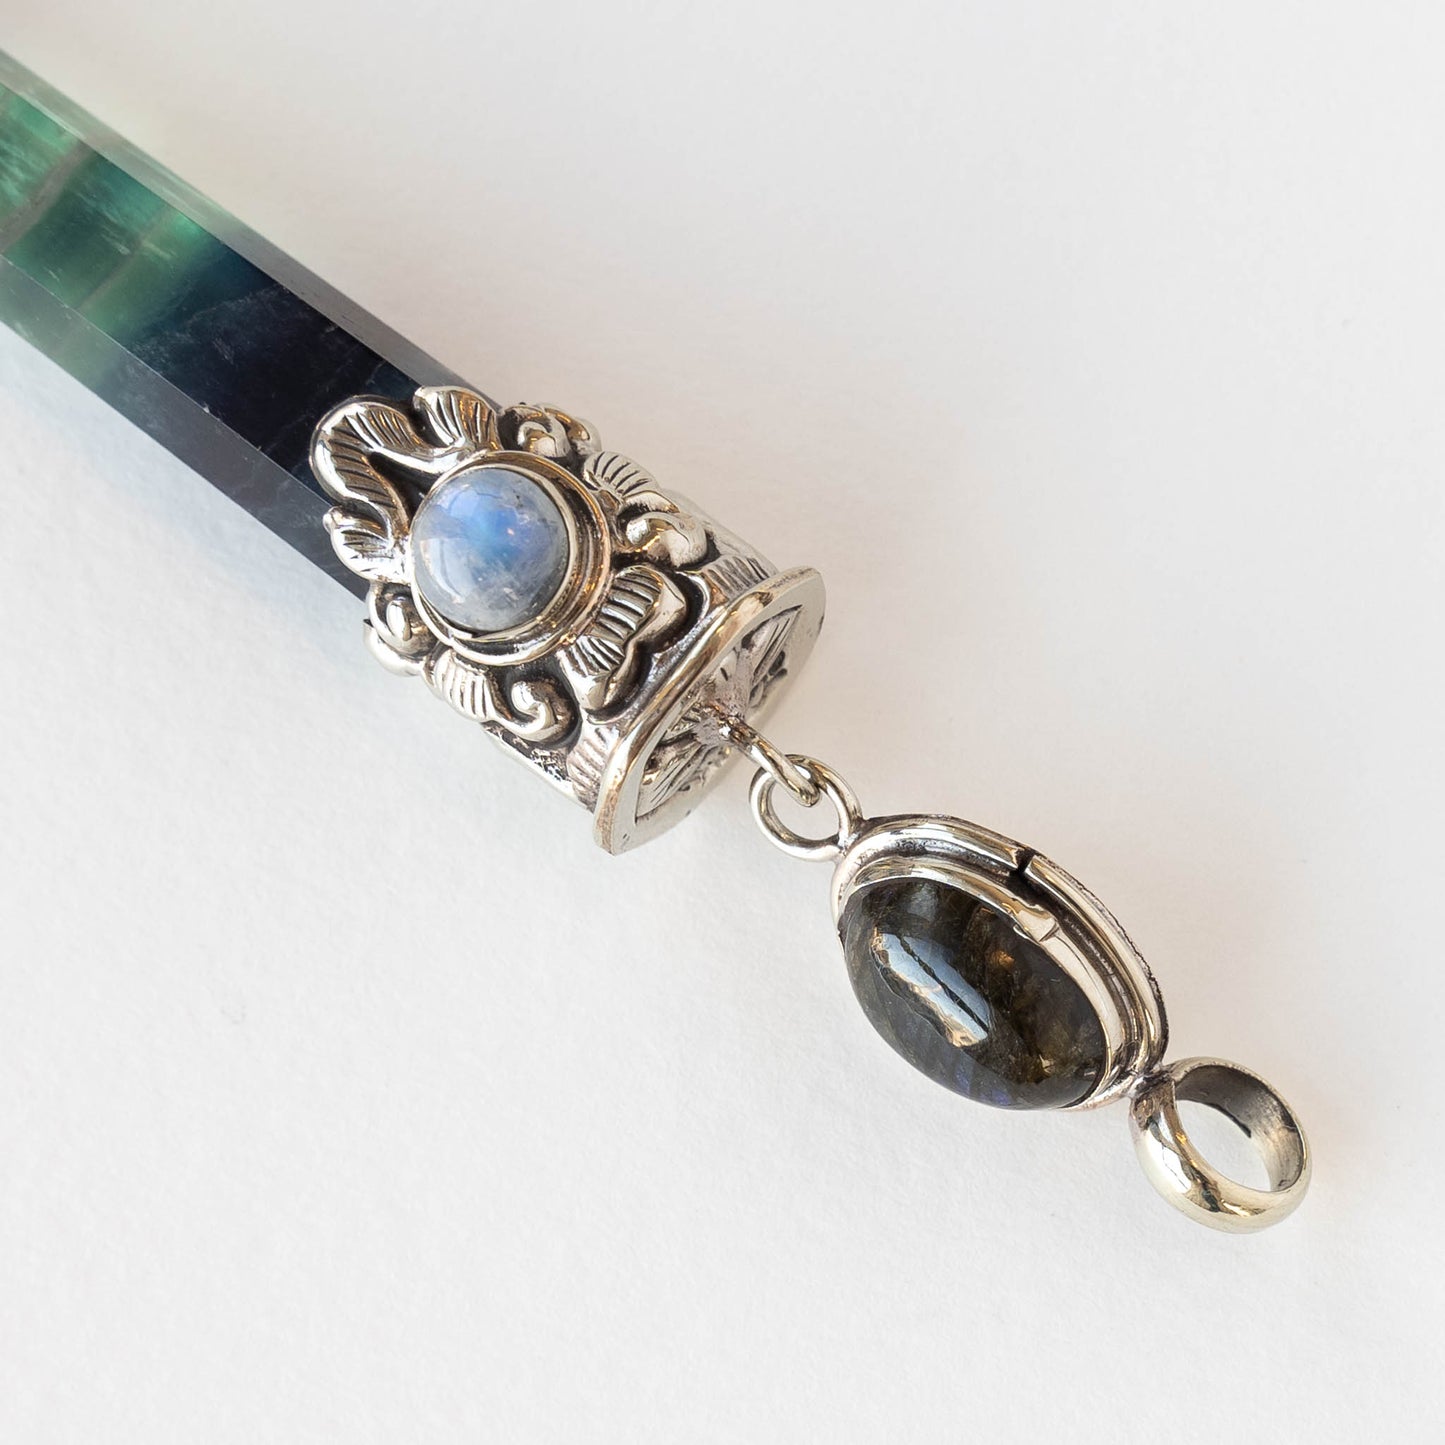 110mm Fluorite Point set in Tibetan Silver with Moonstone and Labradorite  - 1 piece